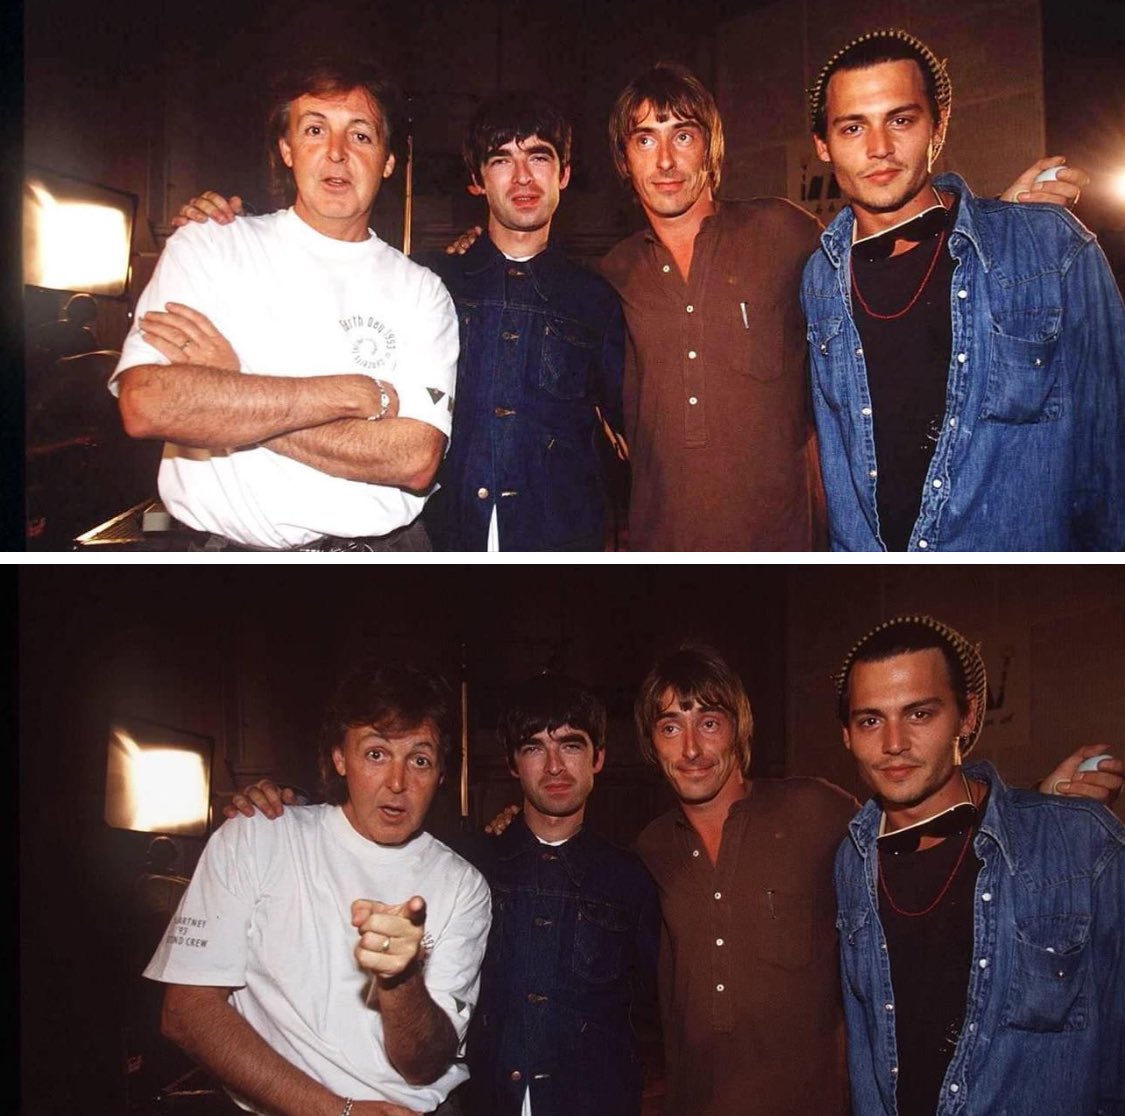 Johnny at the Charity Recording of Help Album as Aid for Bosnia at Abbey Road Studios, London on September 4th, 1995